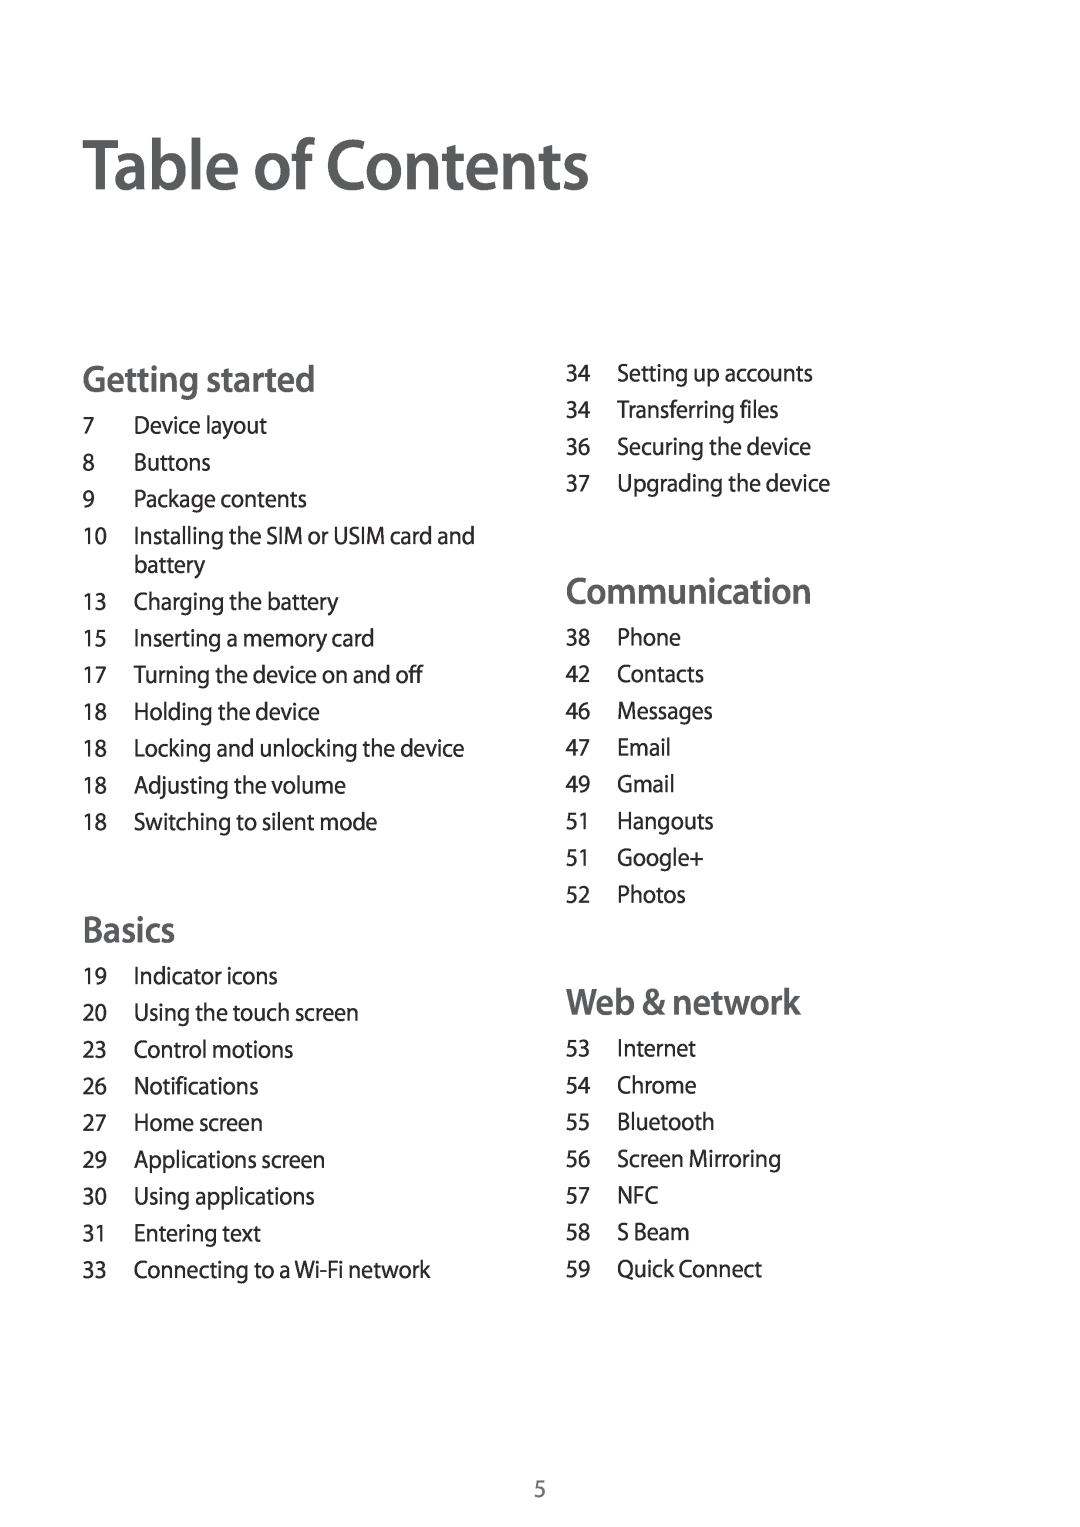 Samsung GT-I9195DKITCL, GT-I9195ZKIATO manual Table of Contents, Getting started, Basics, Communication, Web & network 